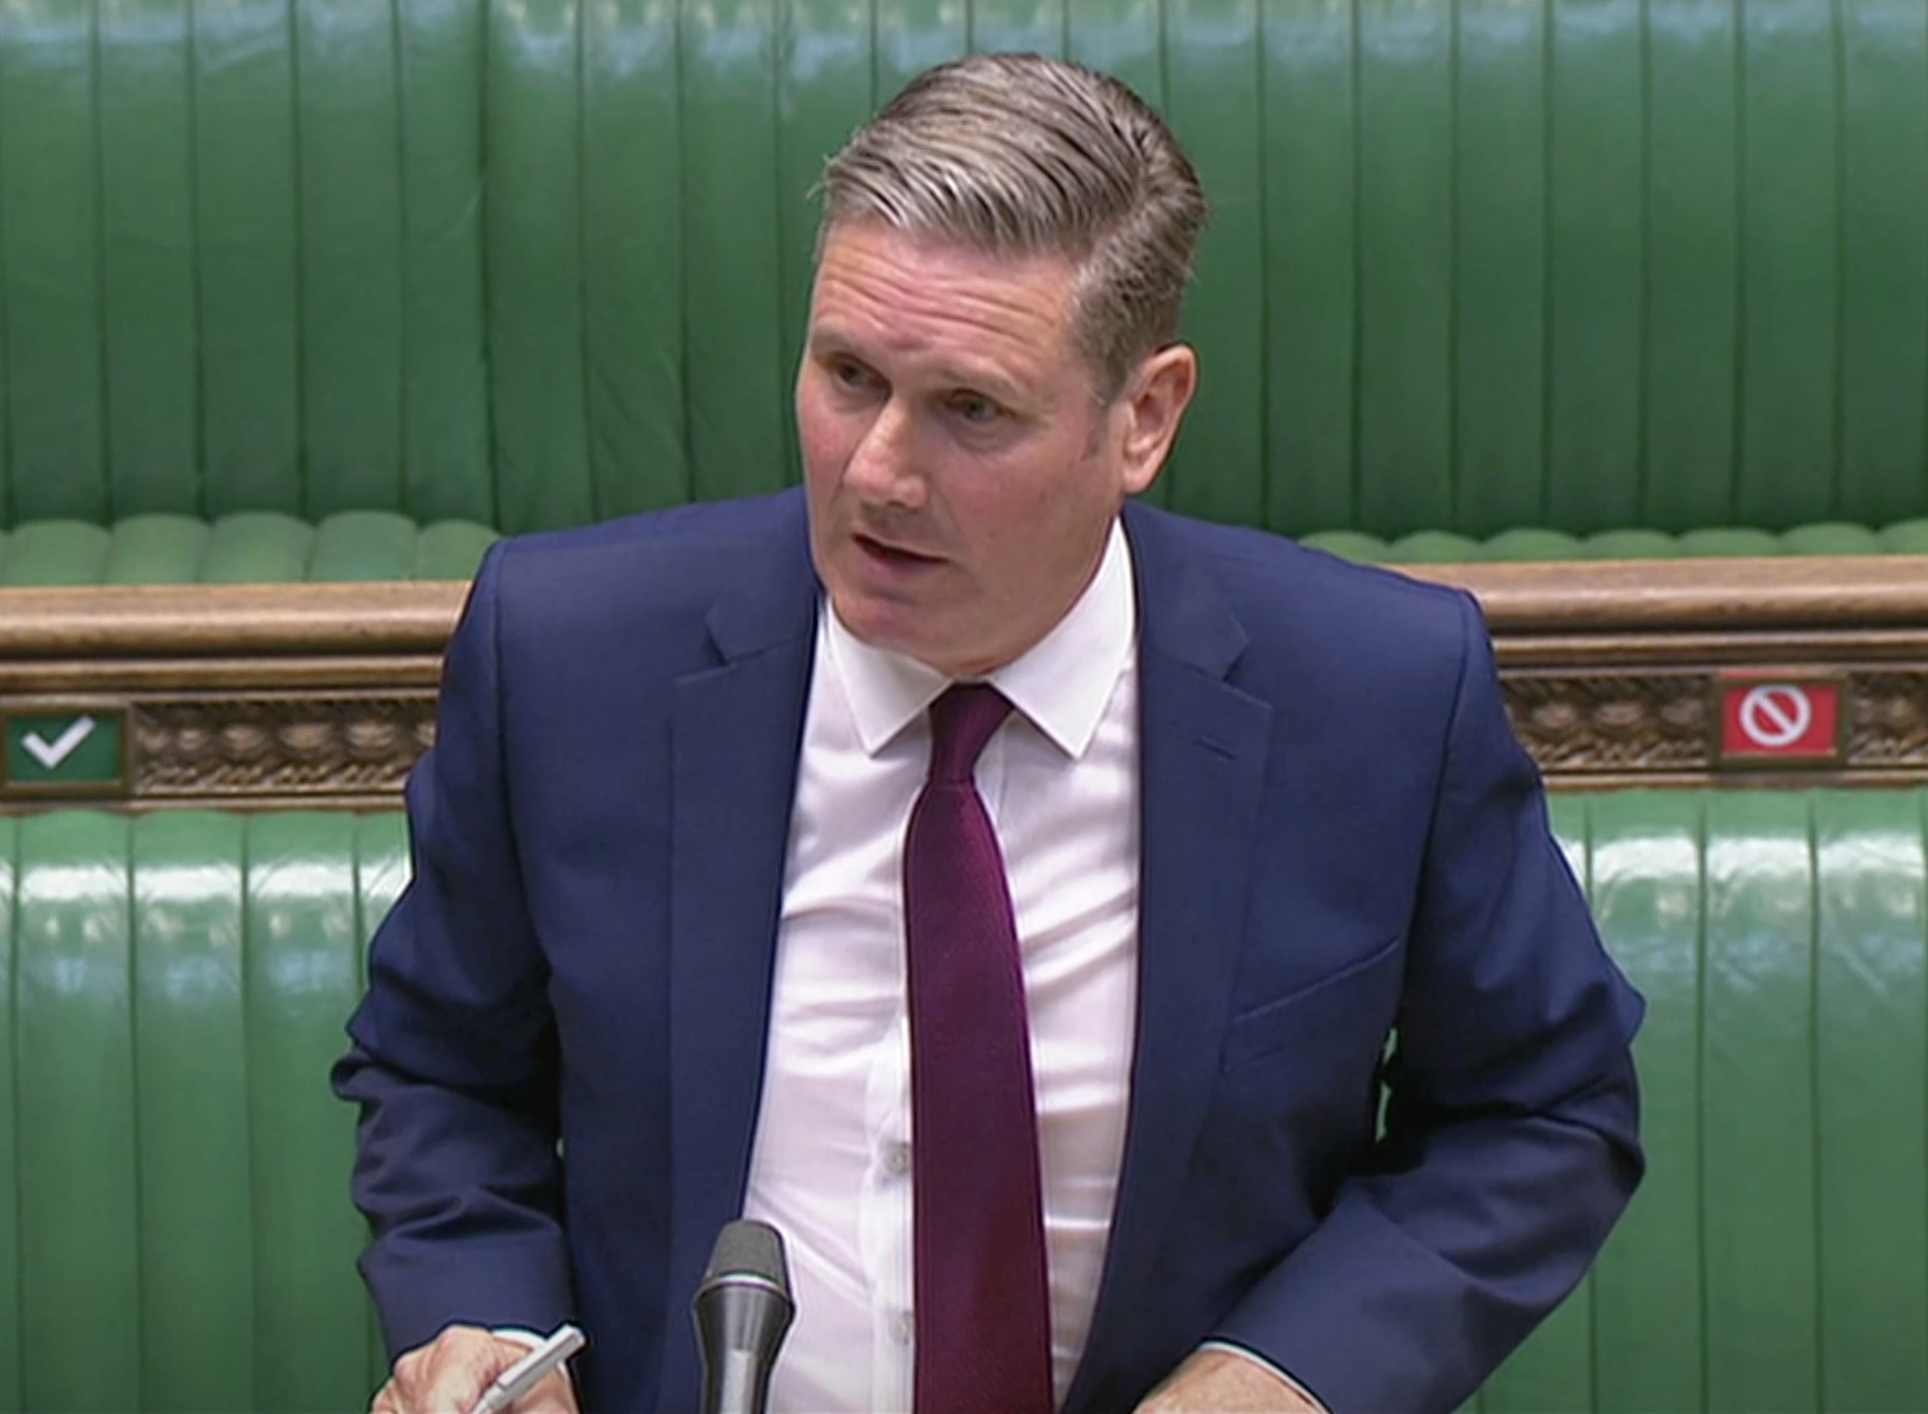 Keir Starmer had a strong first PMQs since the parliamentary recess